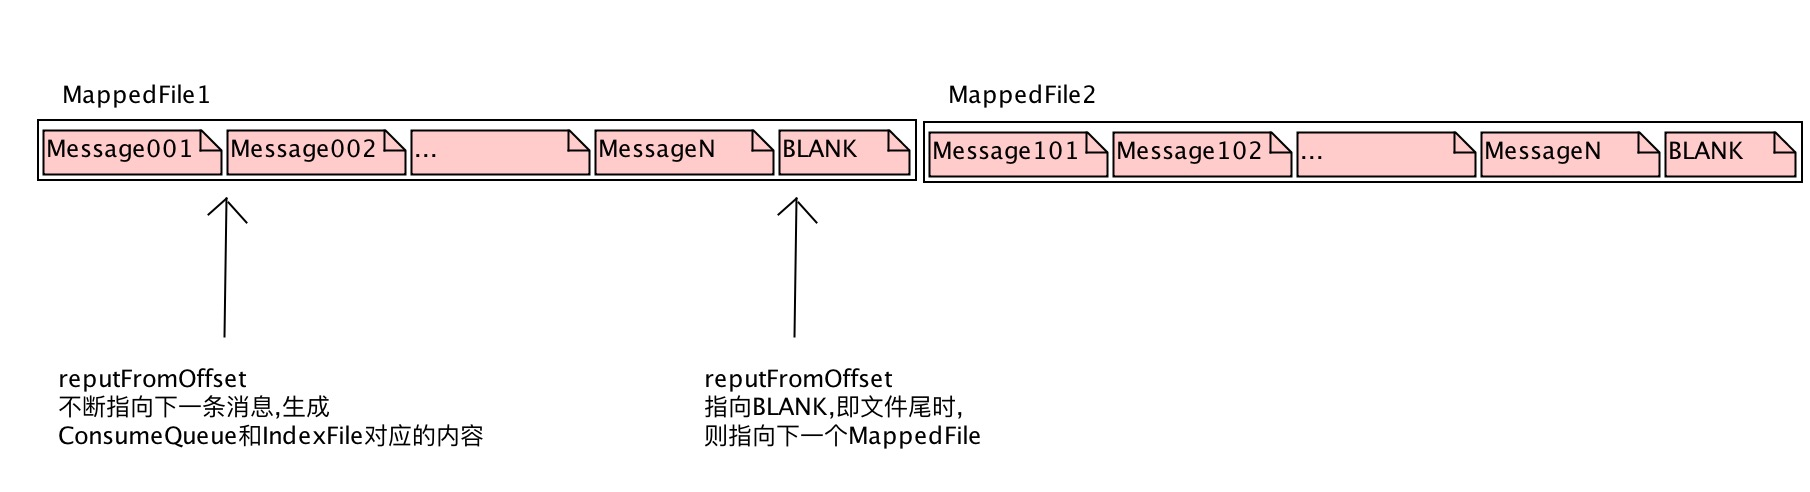 ReputMessageService用例图